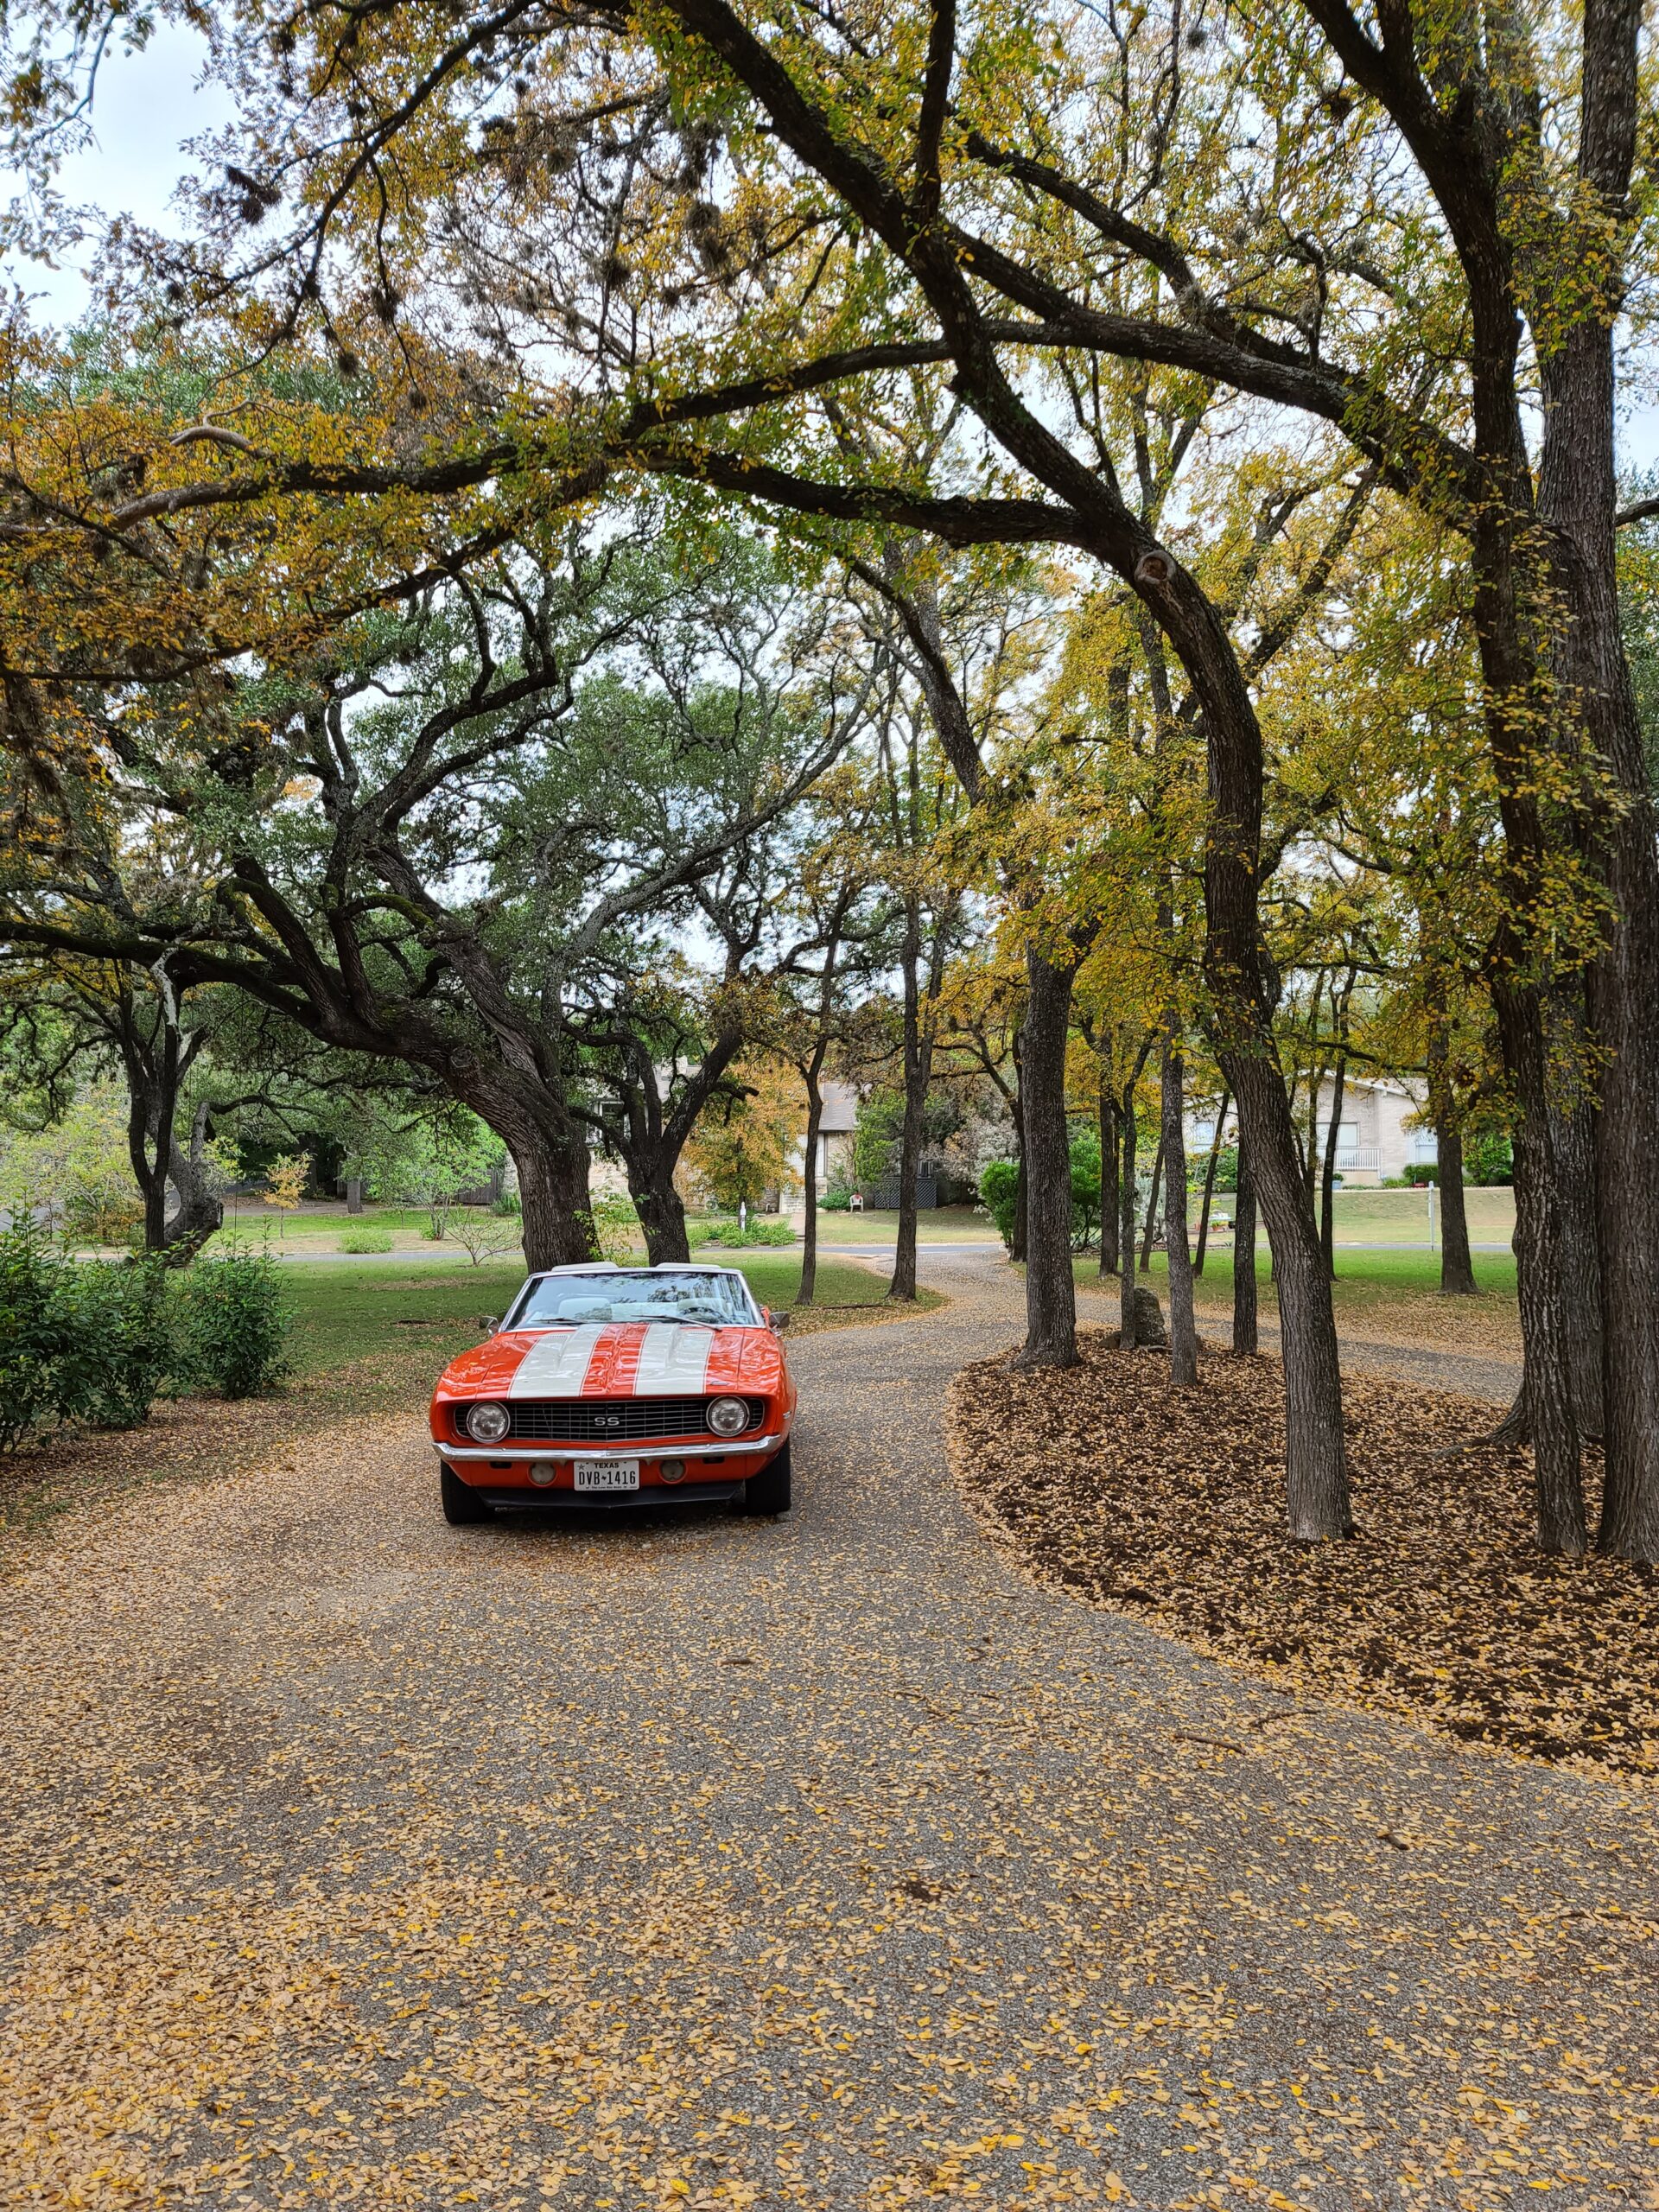 A red and white vintage car is parked on a winding path surrounded by trees with autumn foliage.